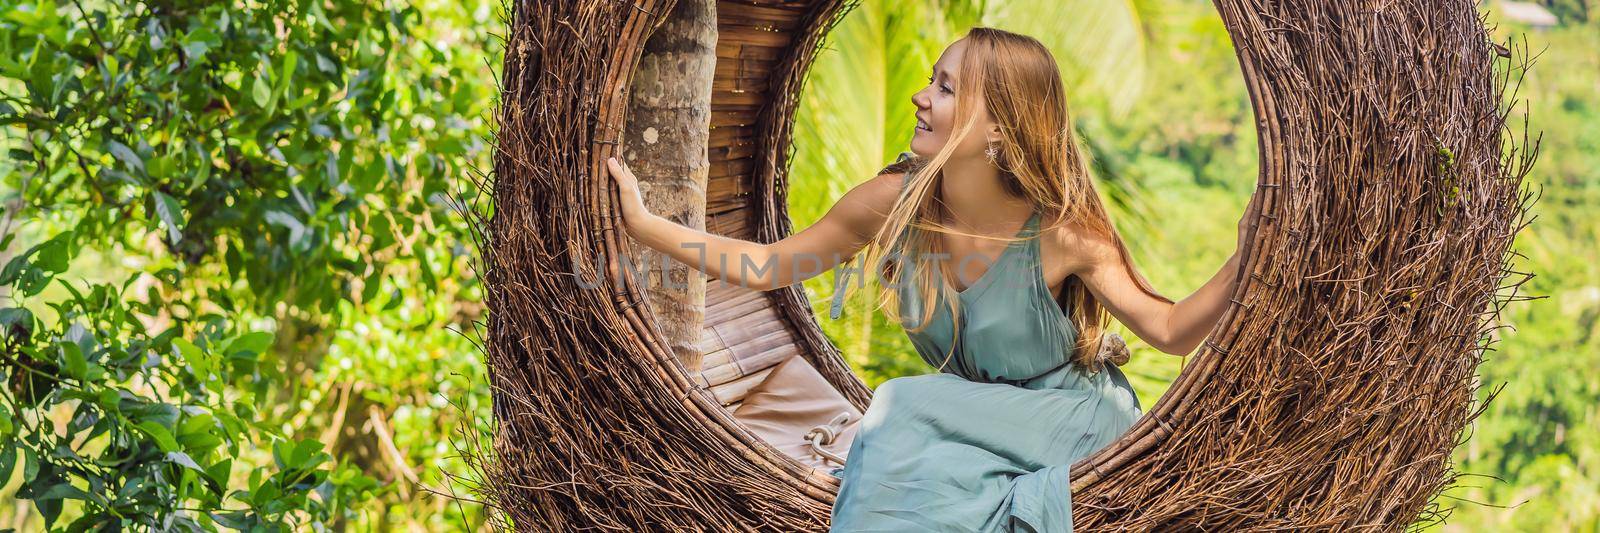 BANNER, LONG FORMAT Bali trend, straw nests everywhere. Young tourist enjoying her travel around Bali island, Indonesia. Making a stop on a beautiful hill. Photo in a straw nest, natural environment. Lifestyle by galitskaya